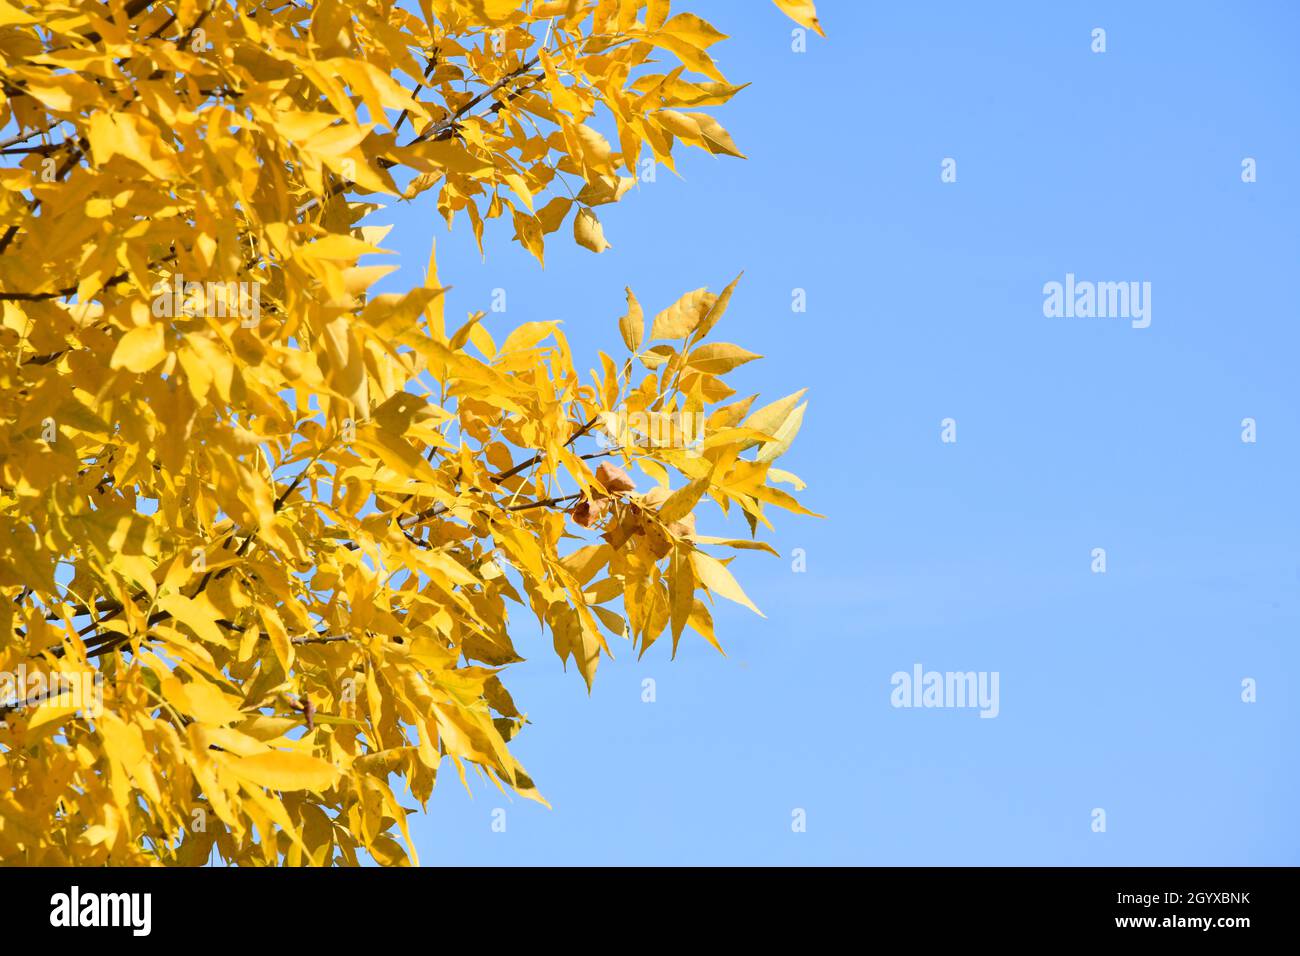 Part of a yellow maple tree against a bright blue sky, on a cloudless, sunny, day. Stock Photo